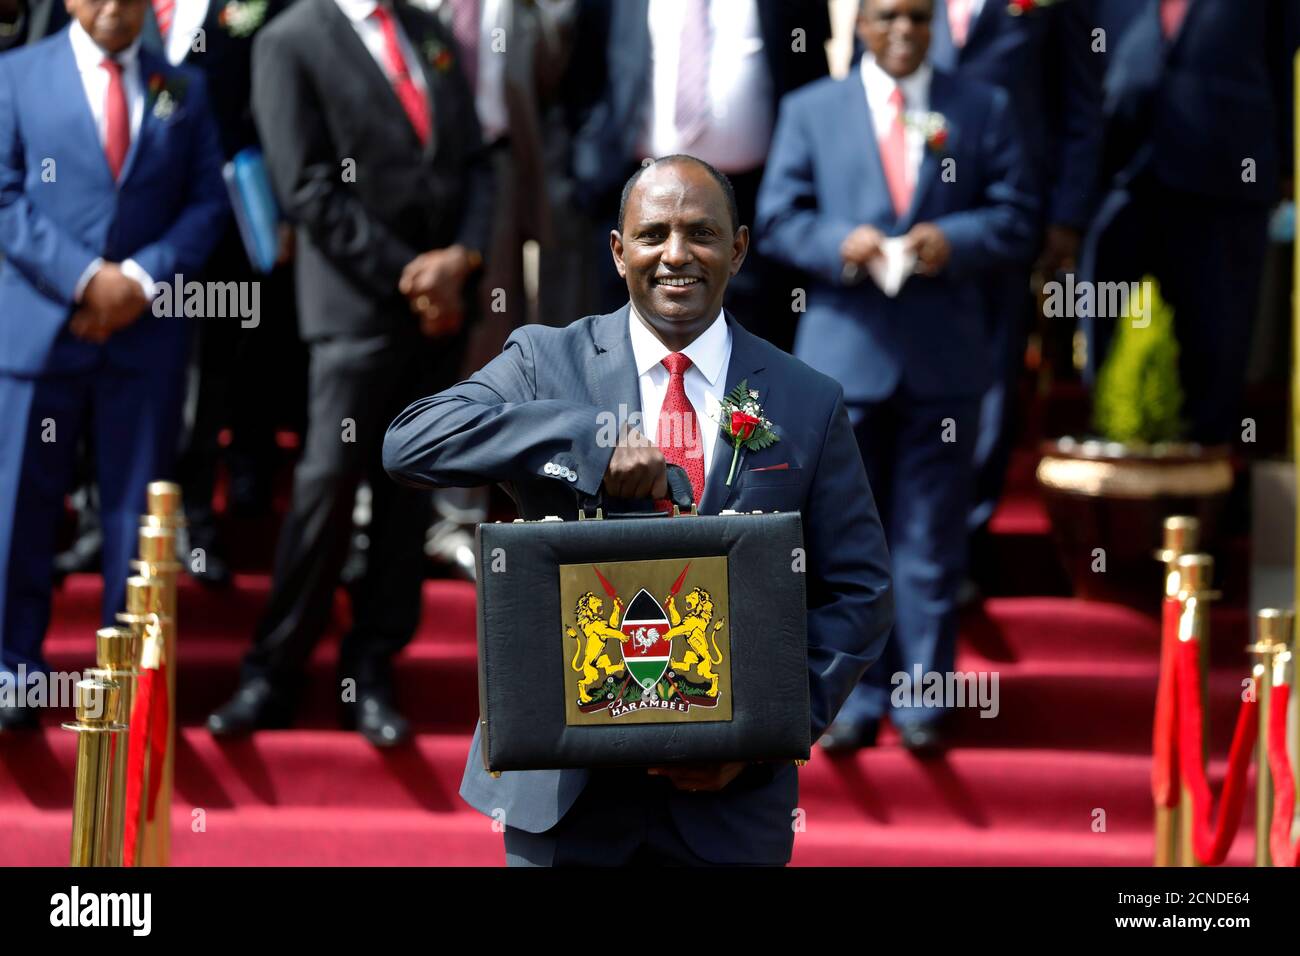 Kenya's Finance Minister Ukur Yatani holds up a briefcase containing the Government Budget for the 2020/21 fiscal year in Nairobi, Kenya, June 11, 2020. REUTERS/Baz Ratner REFILE - CORRECTING FISCAL PERIOD Stock Photo